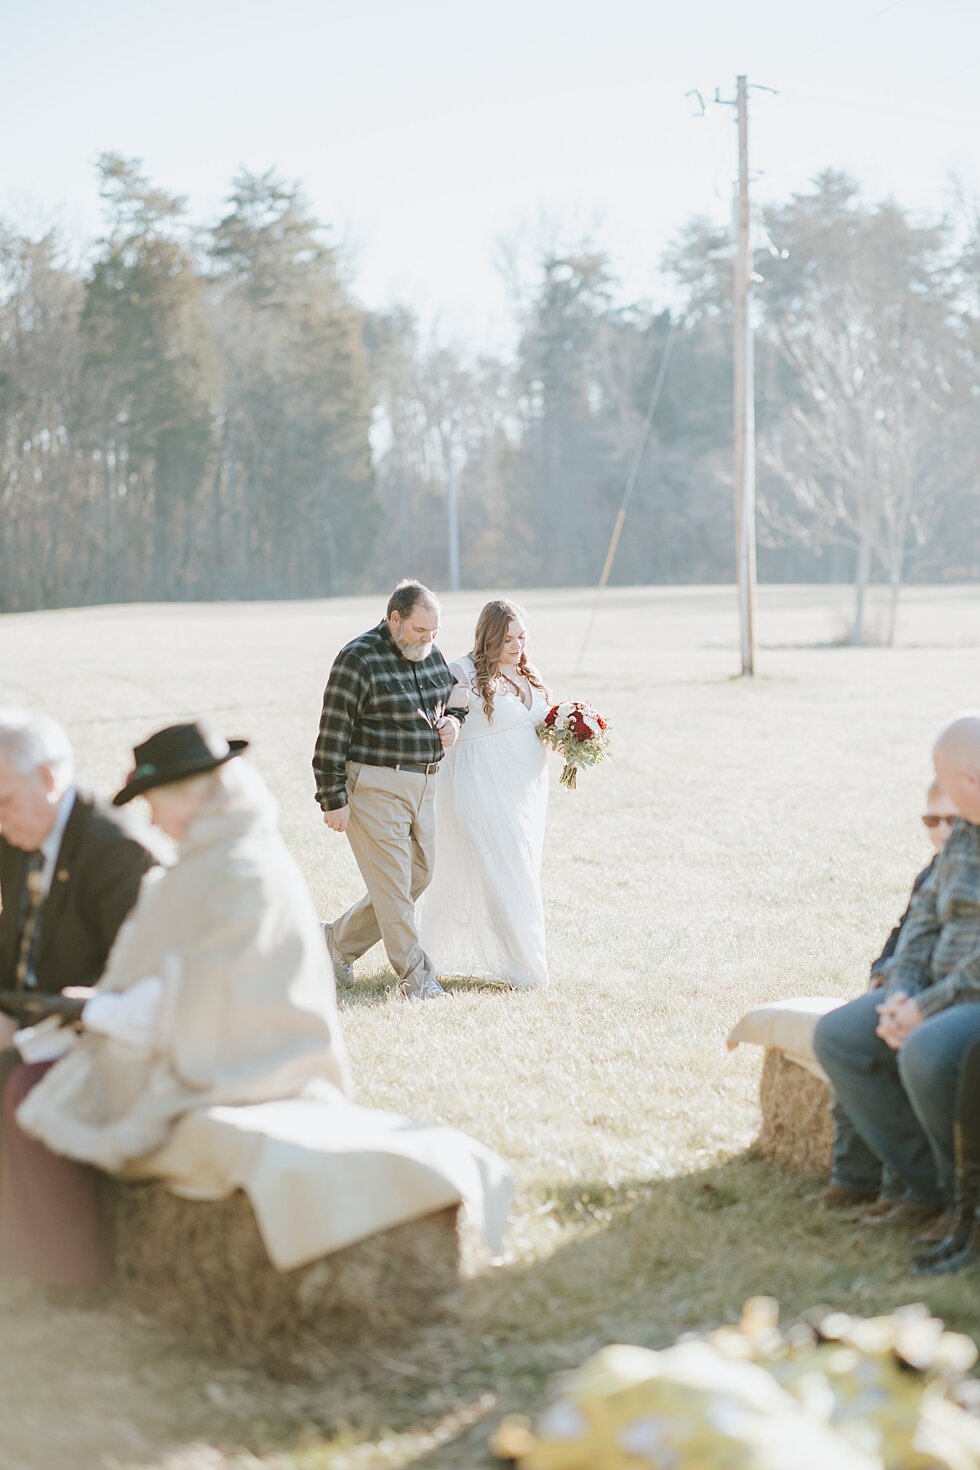  The bride walking down the intimate aisle with her father as the micro wedding began on this winter wedding day in Corydon, Indiana. Southern wedding Indiana intimate wedding small ceremony microceremony corydon indiana professional photographer #wi